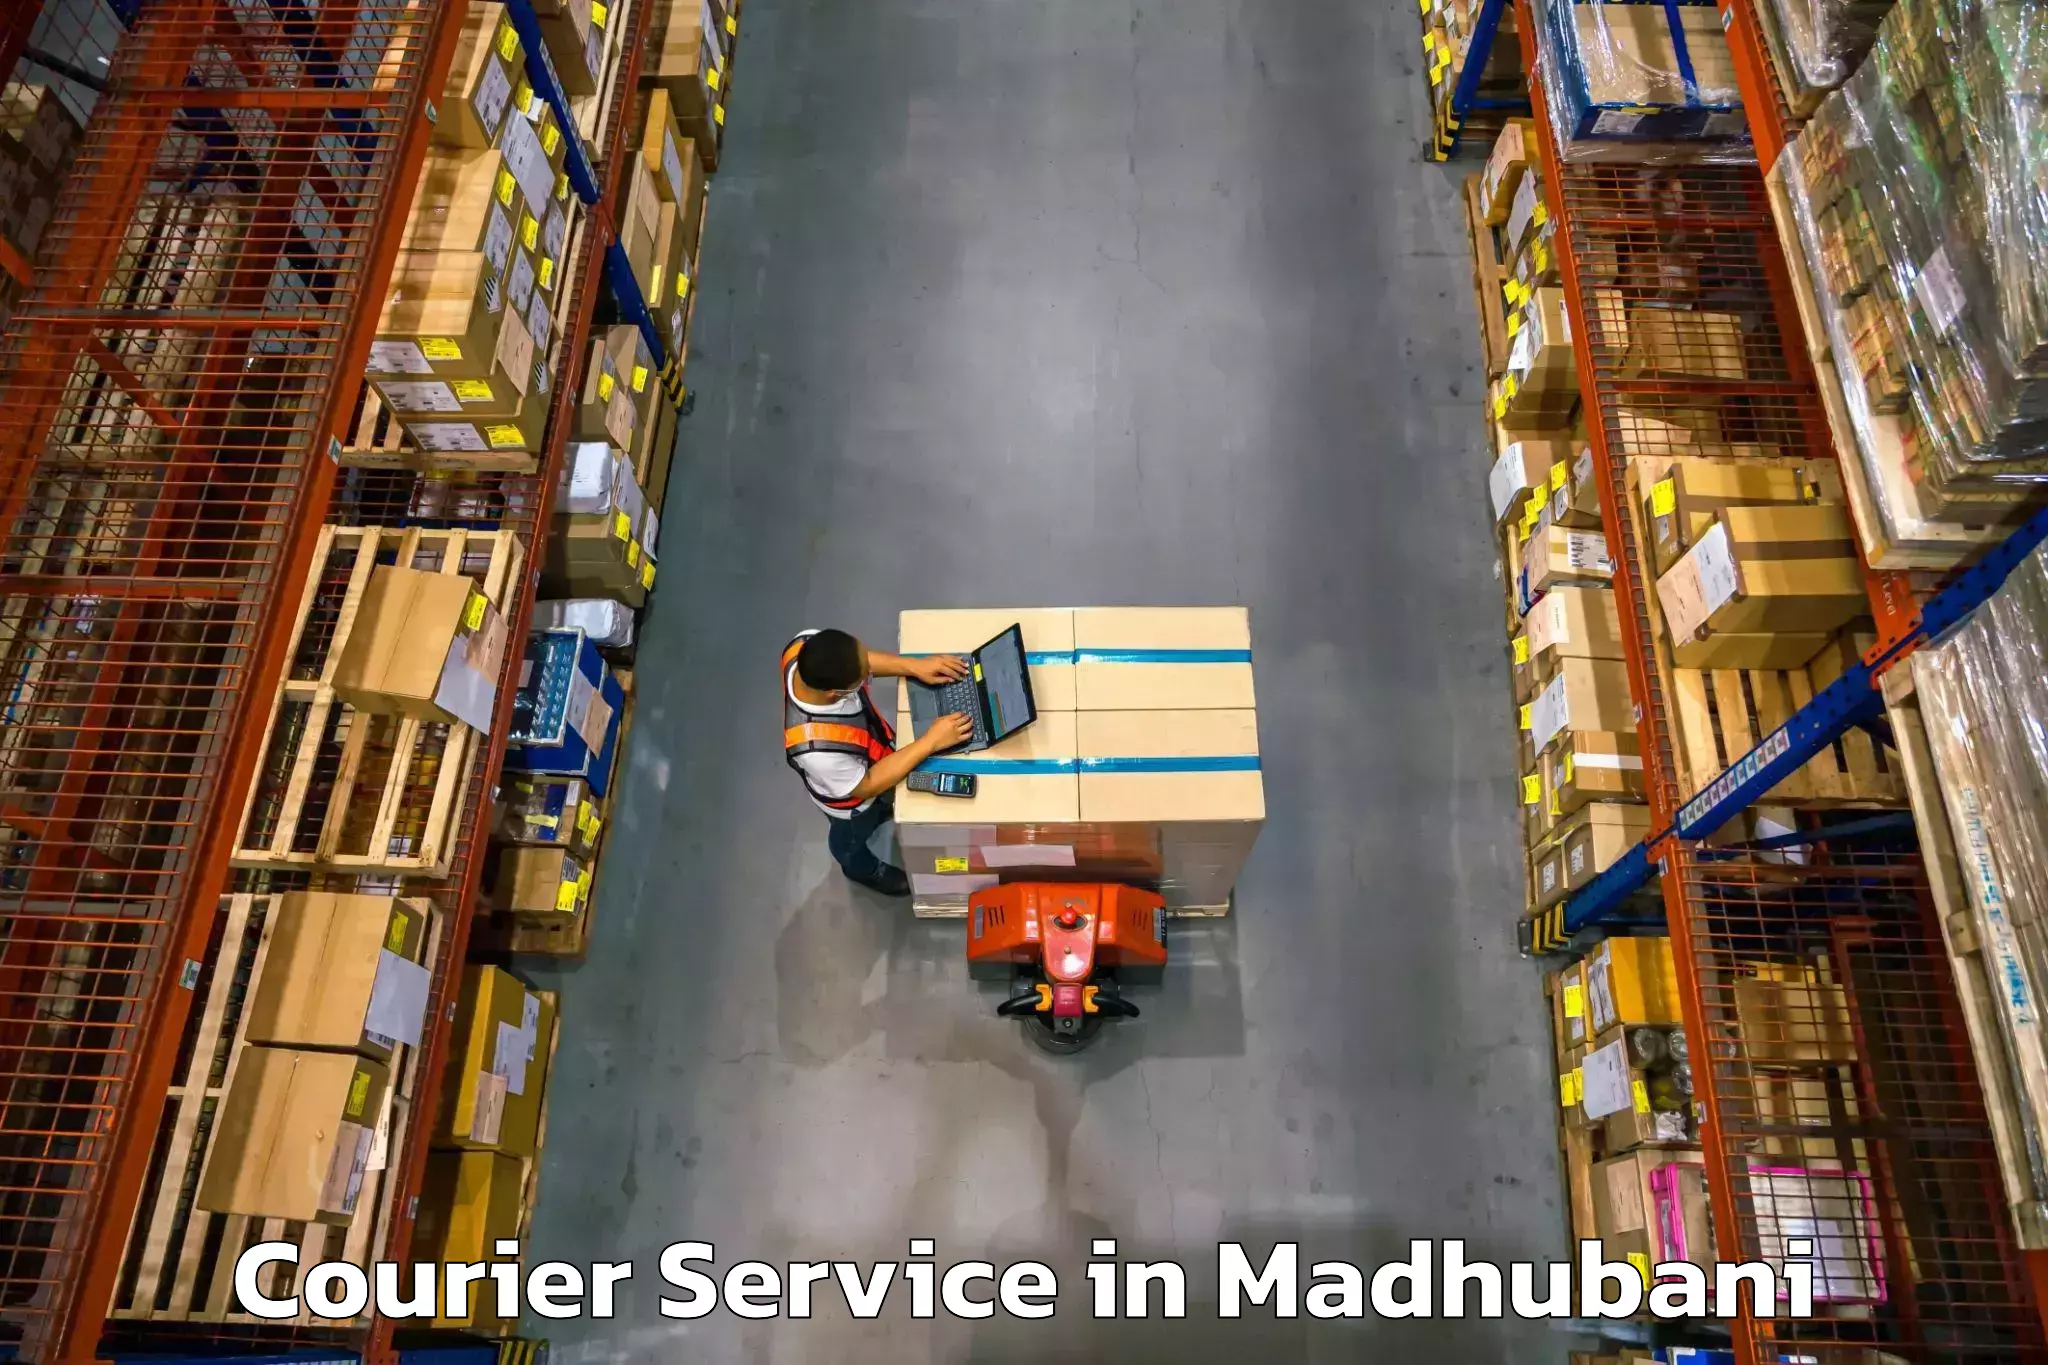 Customer-friendly courier services in Madhubani